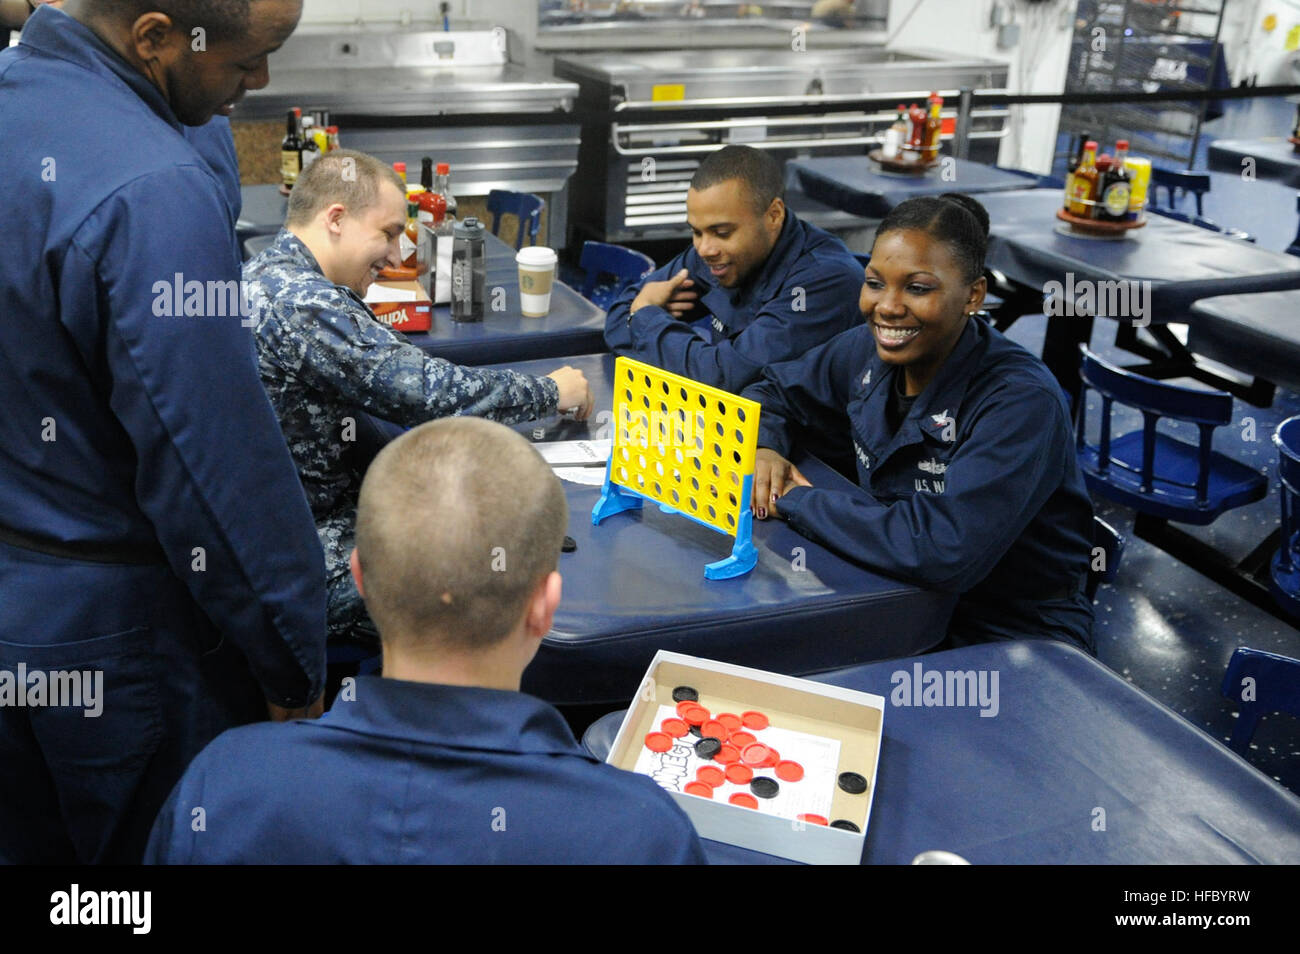 Sailors partake in a game of Connect 4 as part of a junior enlisted association (JEA) event aboard the amphibious assault ship USS Boxer (LHD 4). Boxer is the flagship for the Boxer Amphibious Ready Group and, with the embarked 13th Marine Expeditionary Unit (MEU), is deployed in support of maritime security operations and theater security cooperation efforts in the U.S. 5th Fleet area of responsibility. (U.S. Navy photo by Mass Communication Specialist Seaman Veronica Mammina/Released) Game night at sea 131022-N-GM561-086 Stock Photo